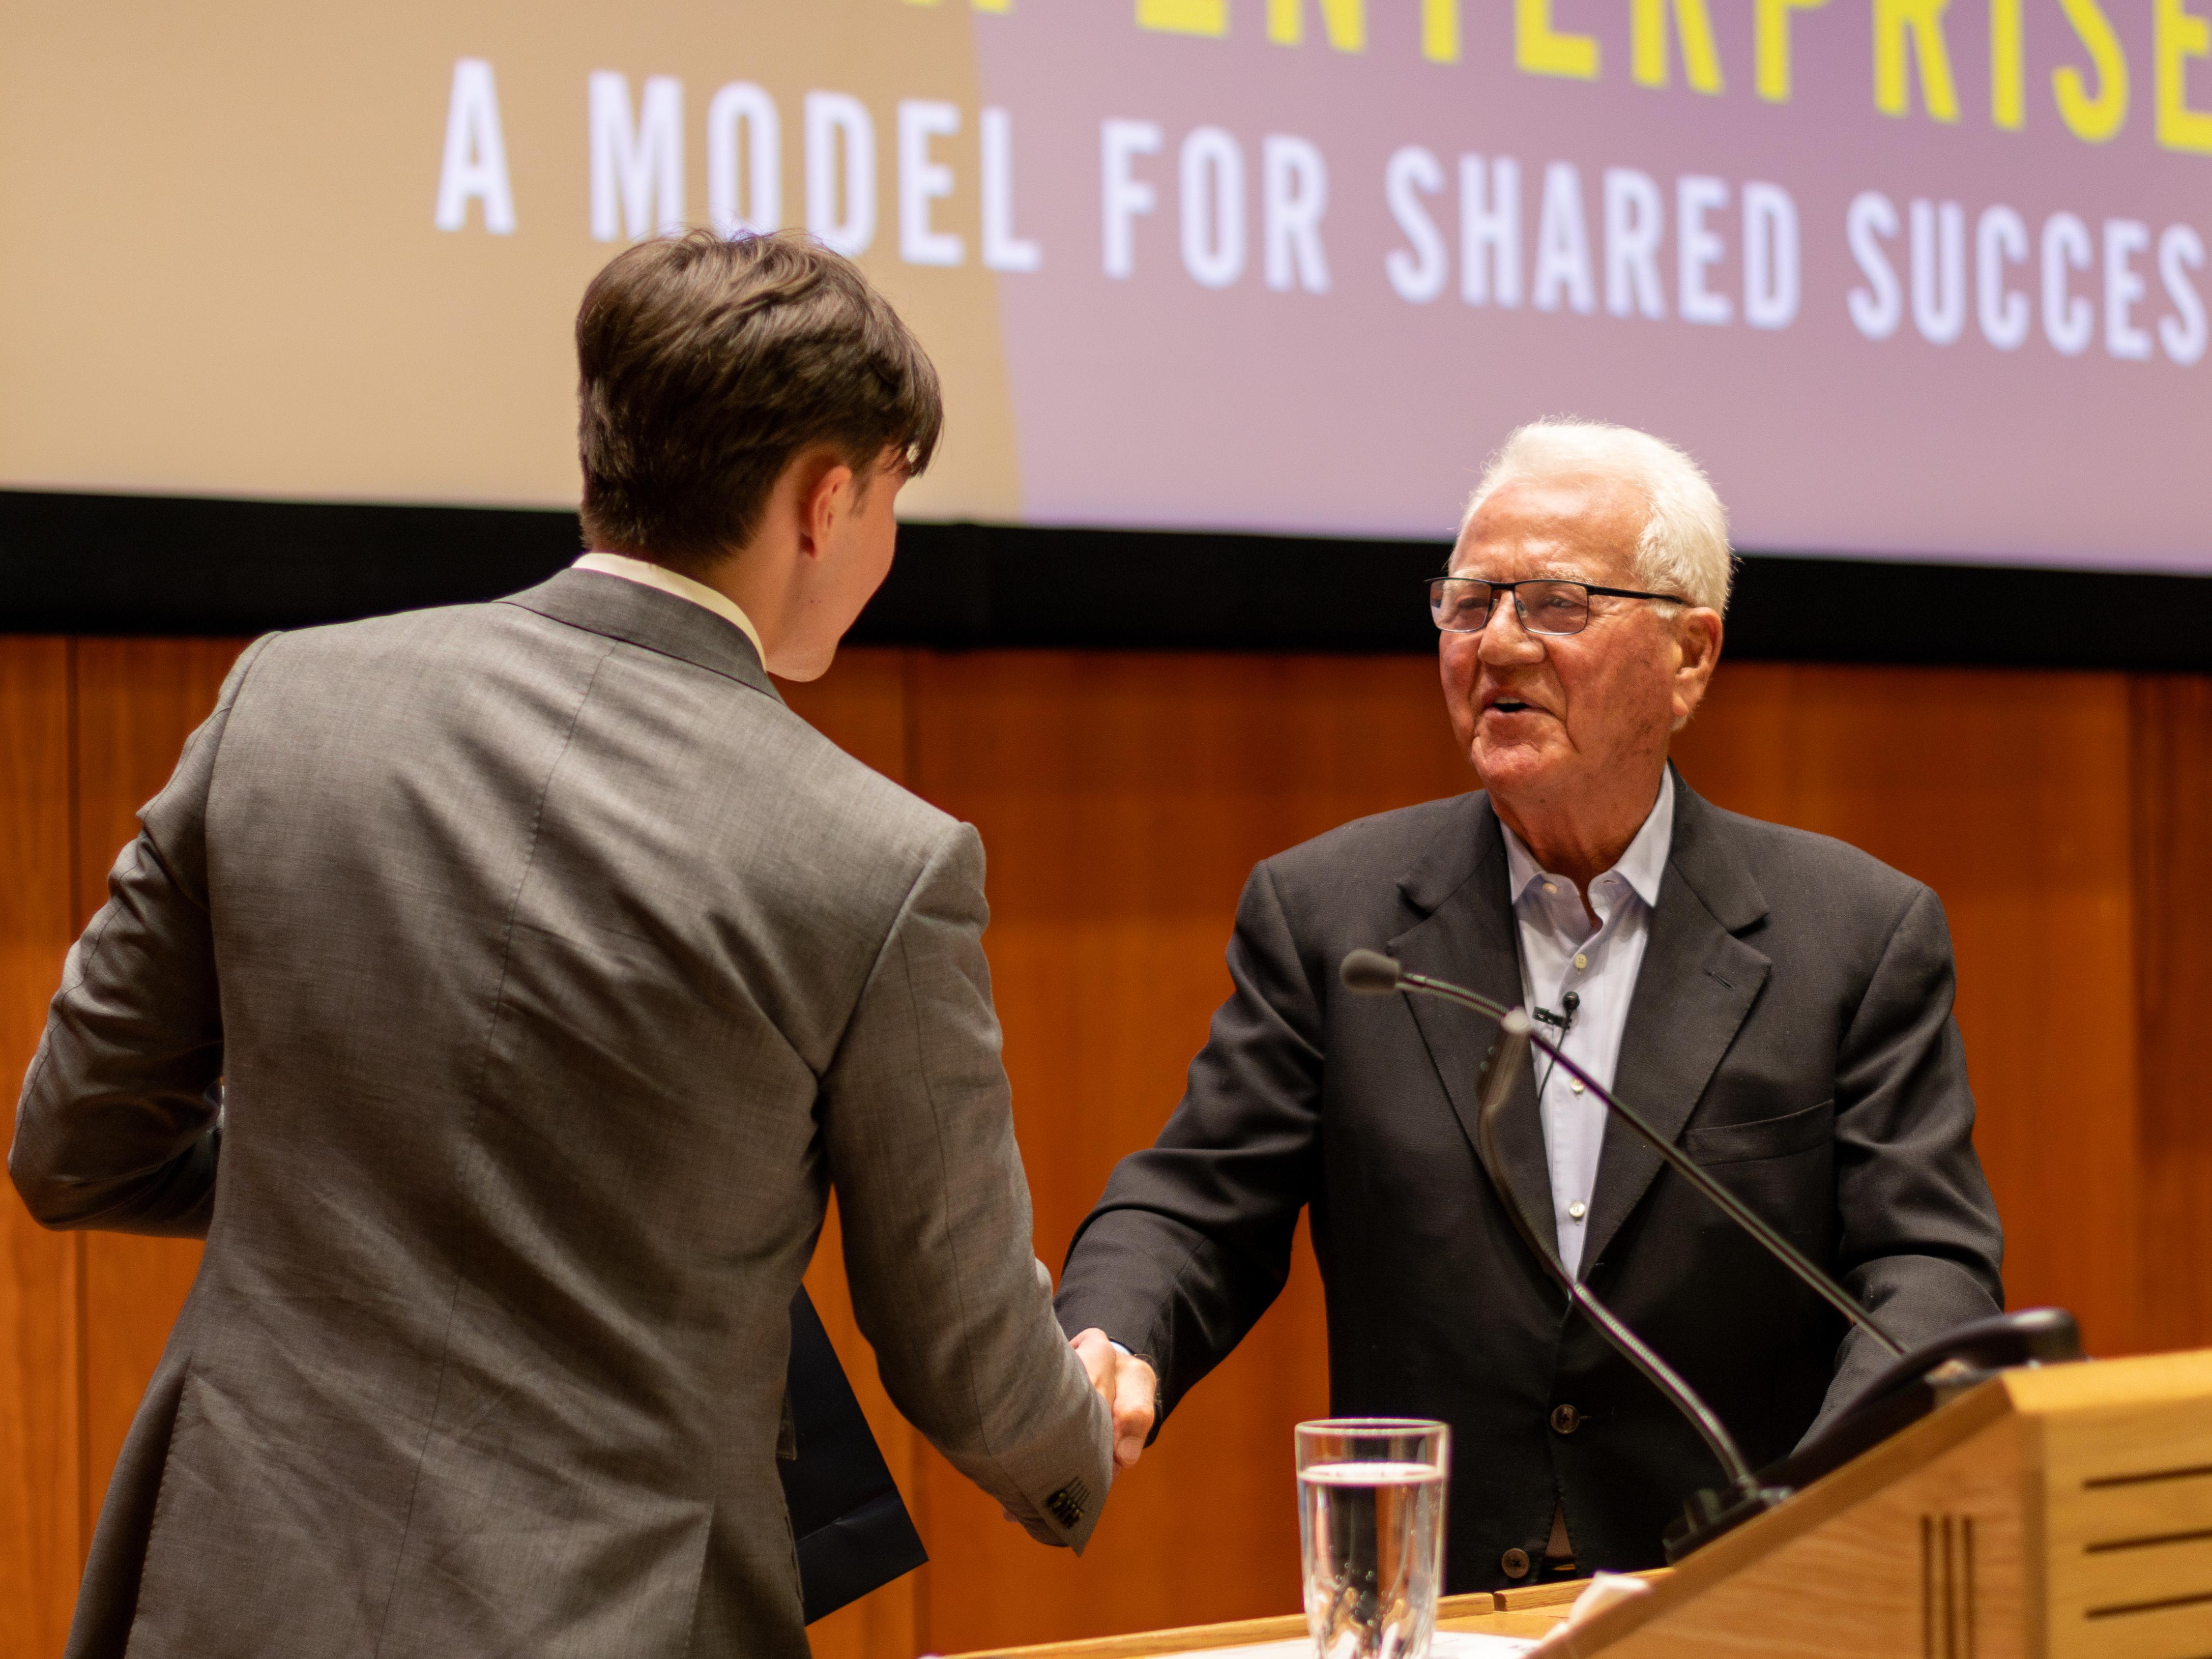 Frank Stronach shakes hands with Management student Spencer Chang